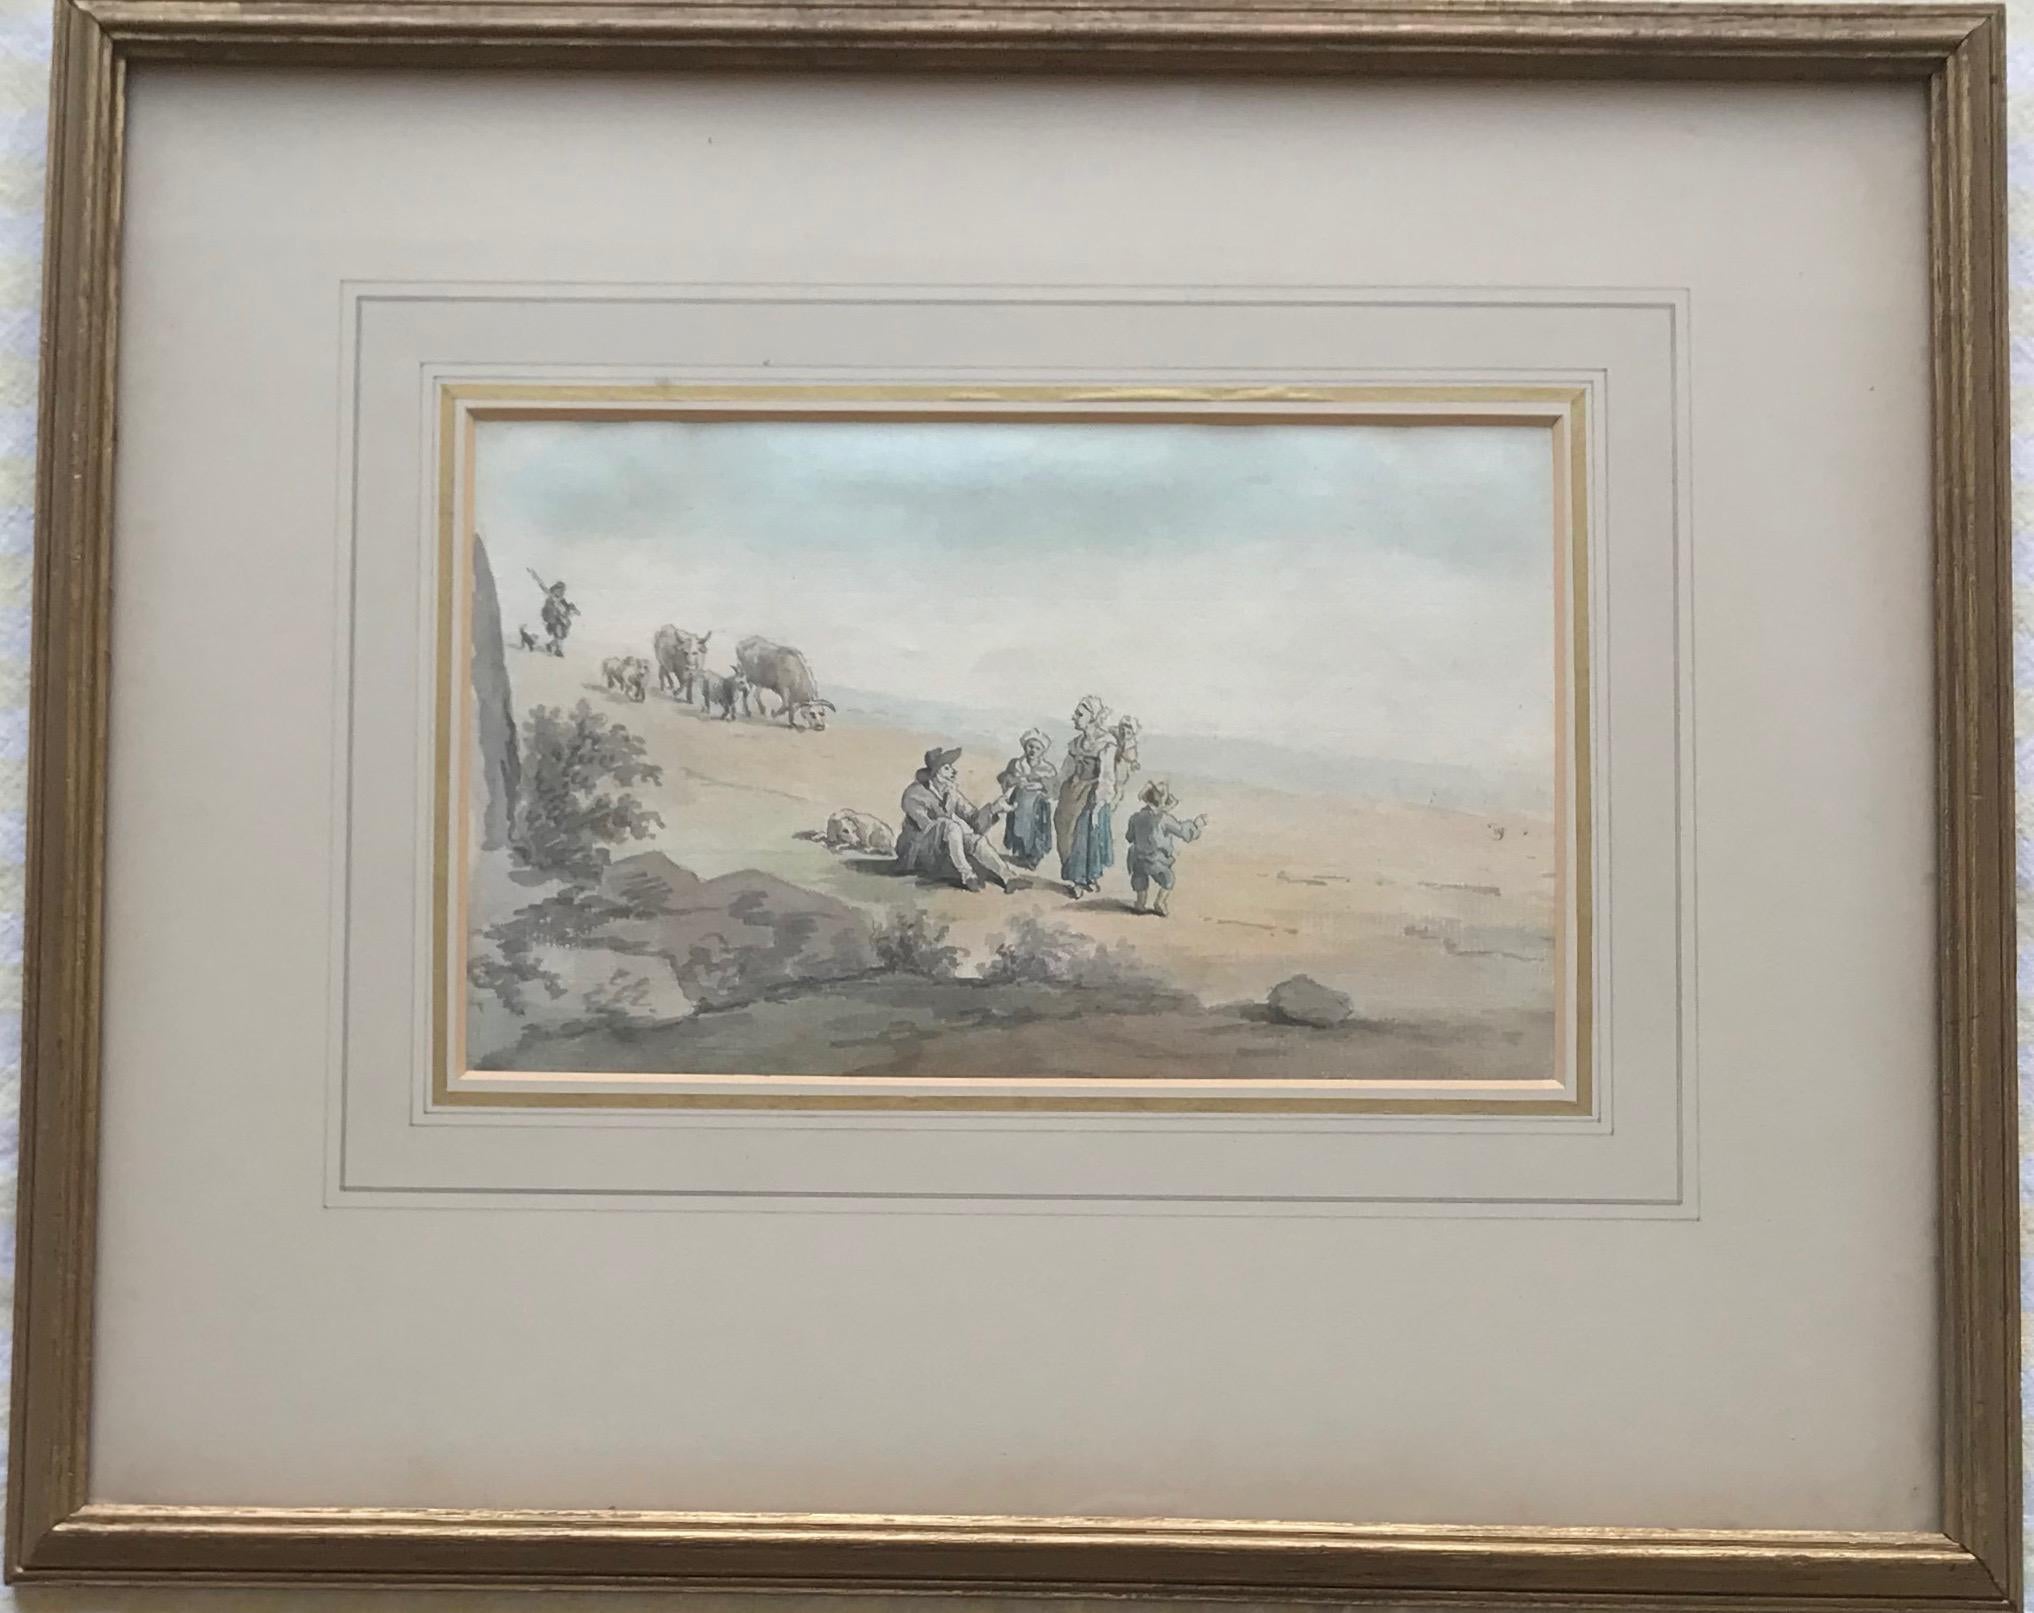 Attributed to Peter Le Cave, 18th Century watercolor on laid paper, rustic scene 4